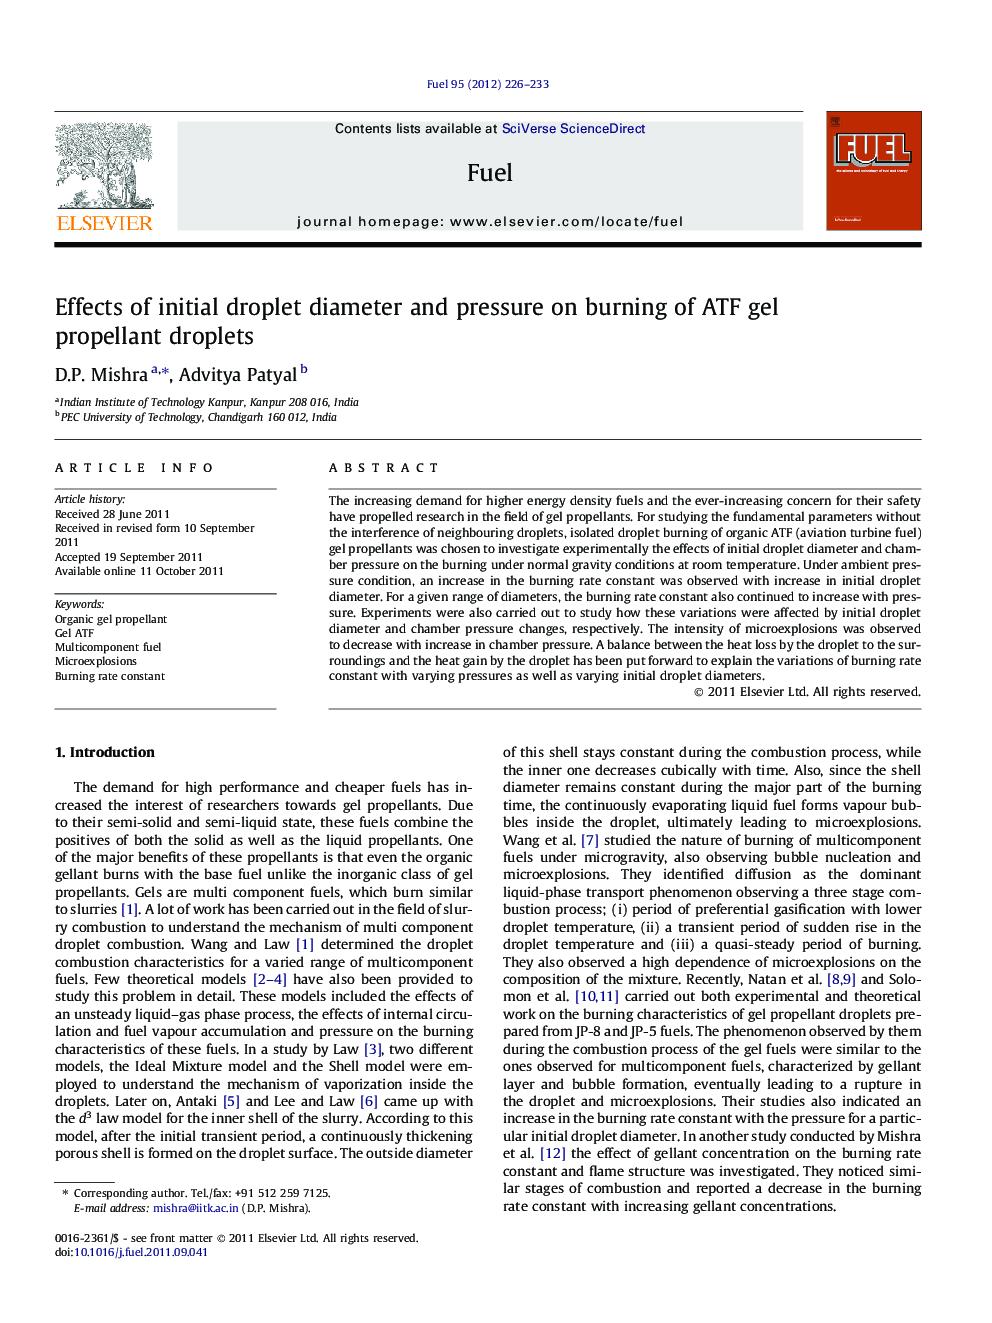 Effects of initial droplet diameter and pressure on burning of ATF gel propellant droplets